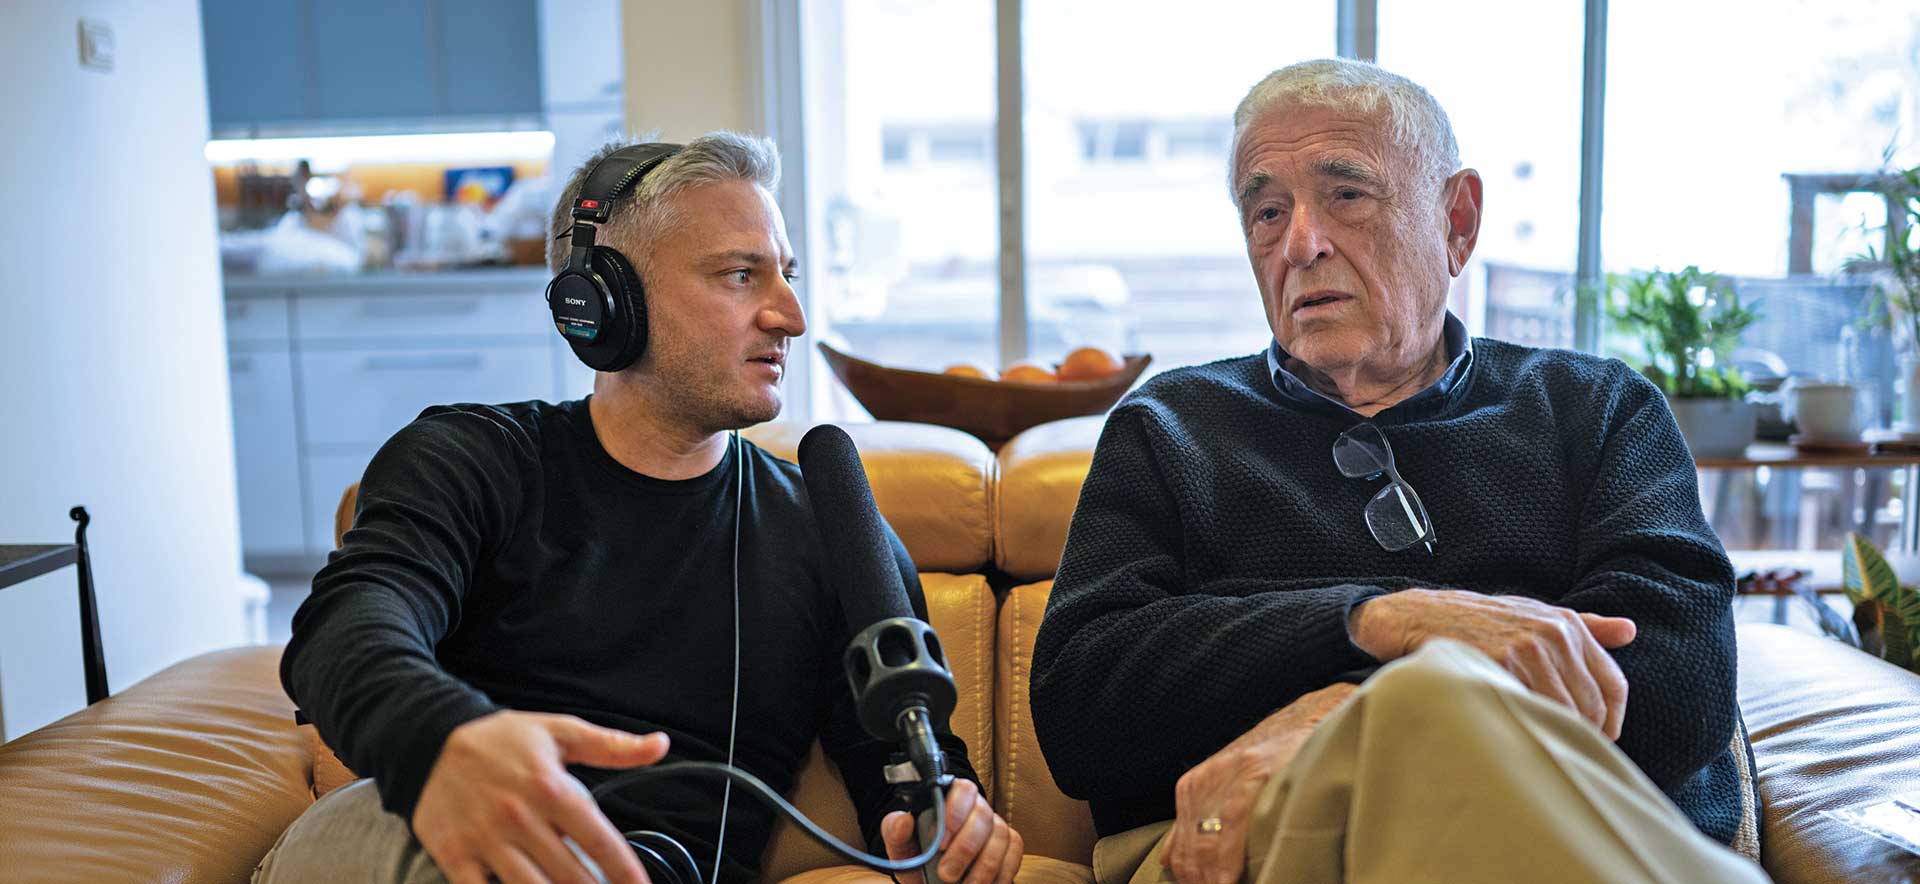 A person in headphones with microphone interviews another person. They are both sitting on a couch.